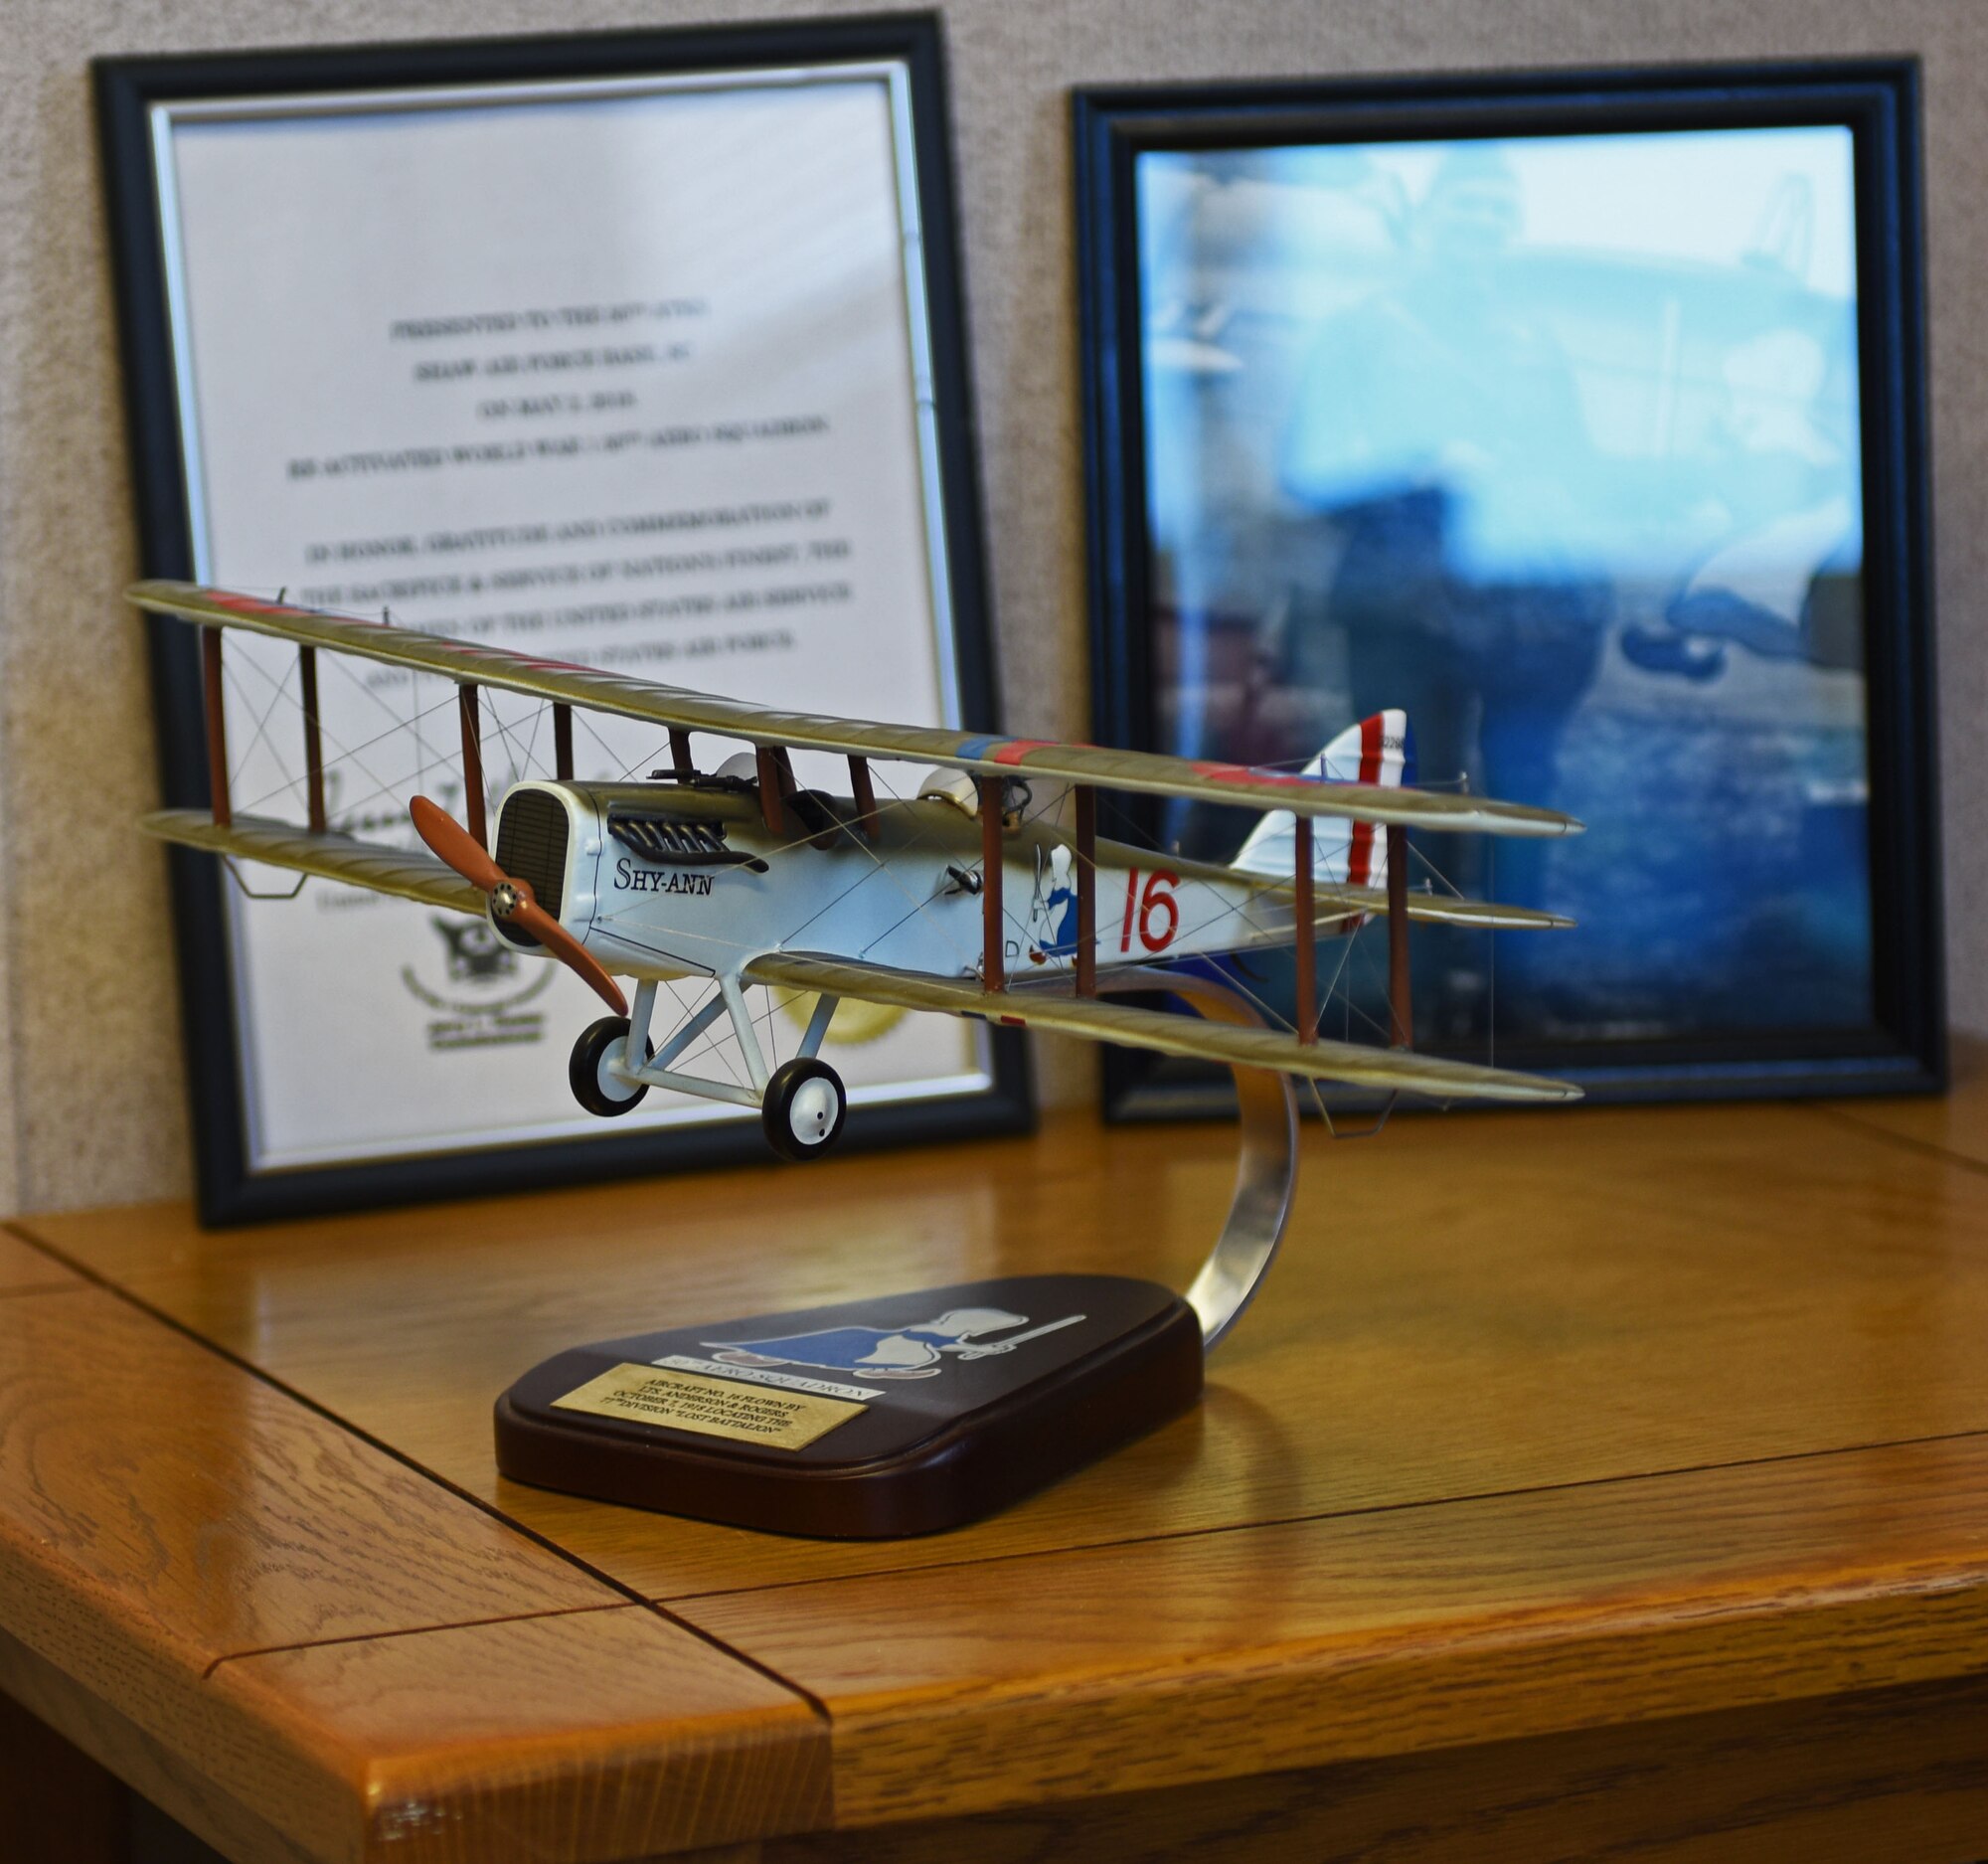 On display is the Airco DH-4 model aircraft that was presented to the 50th Attack Squadron by Jerry Hester, World War I centennial commissioner at Shaw Air Force Base, S.C., May 2, 2018.